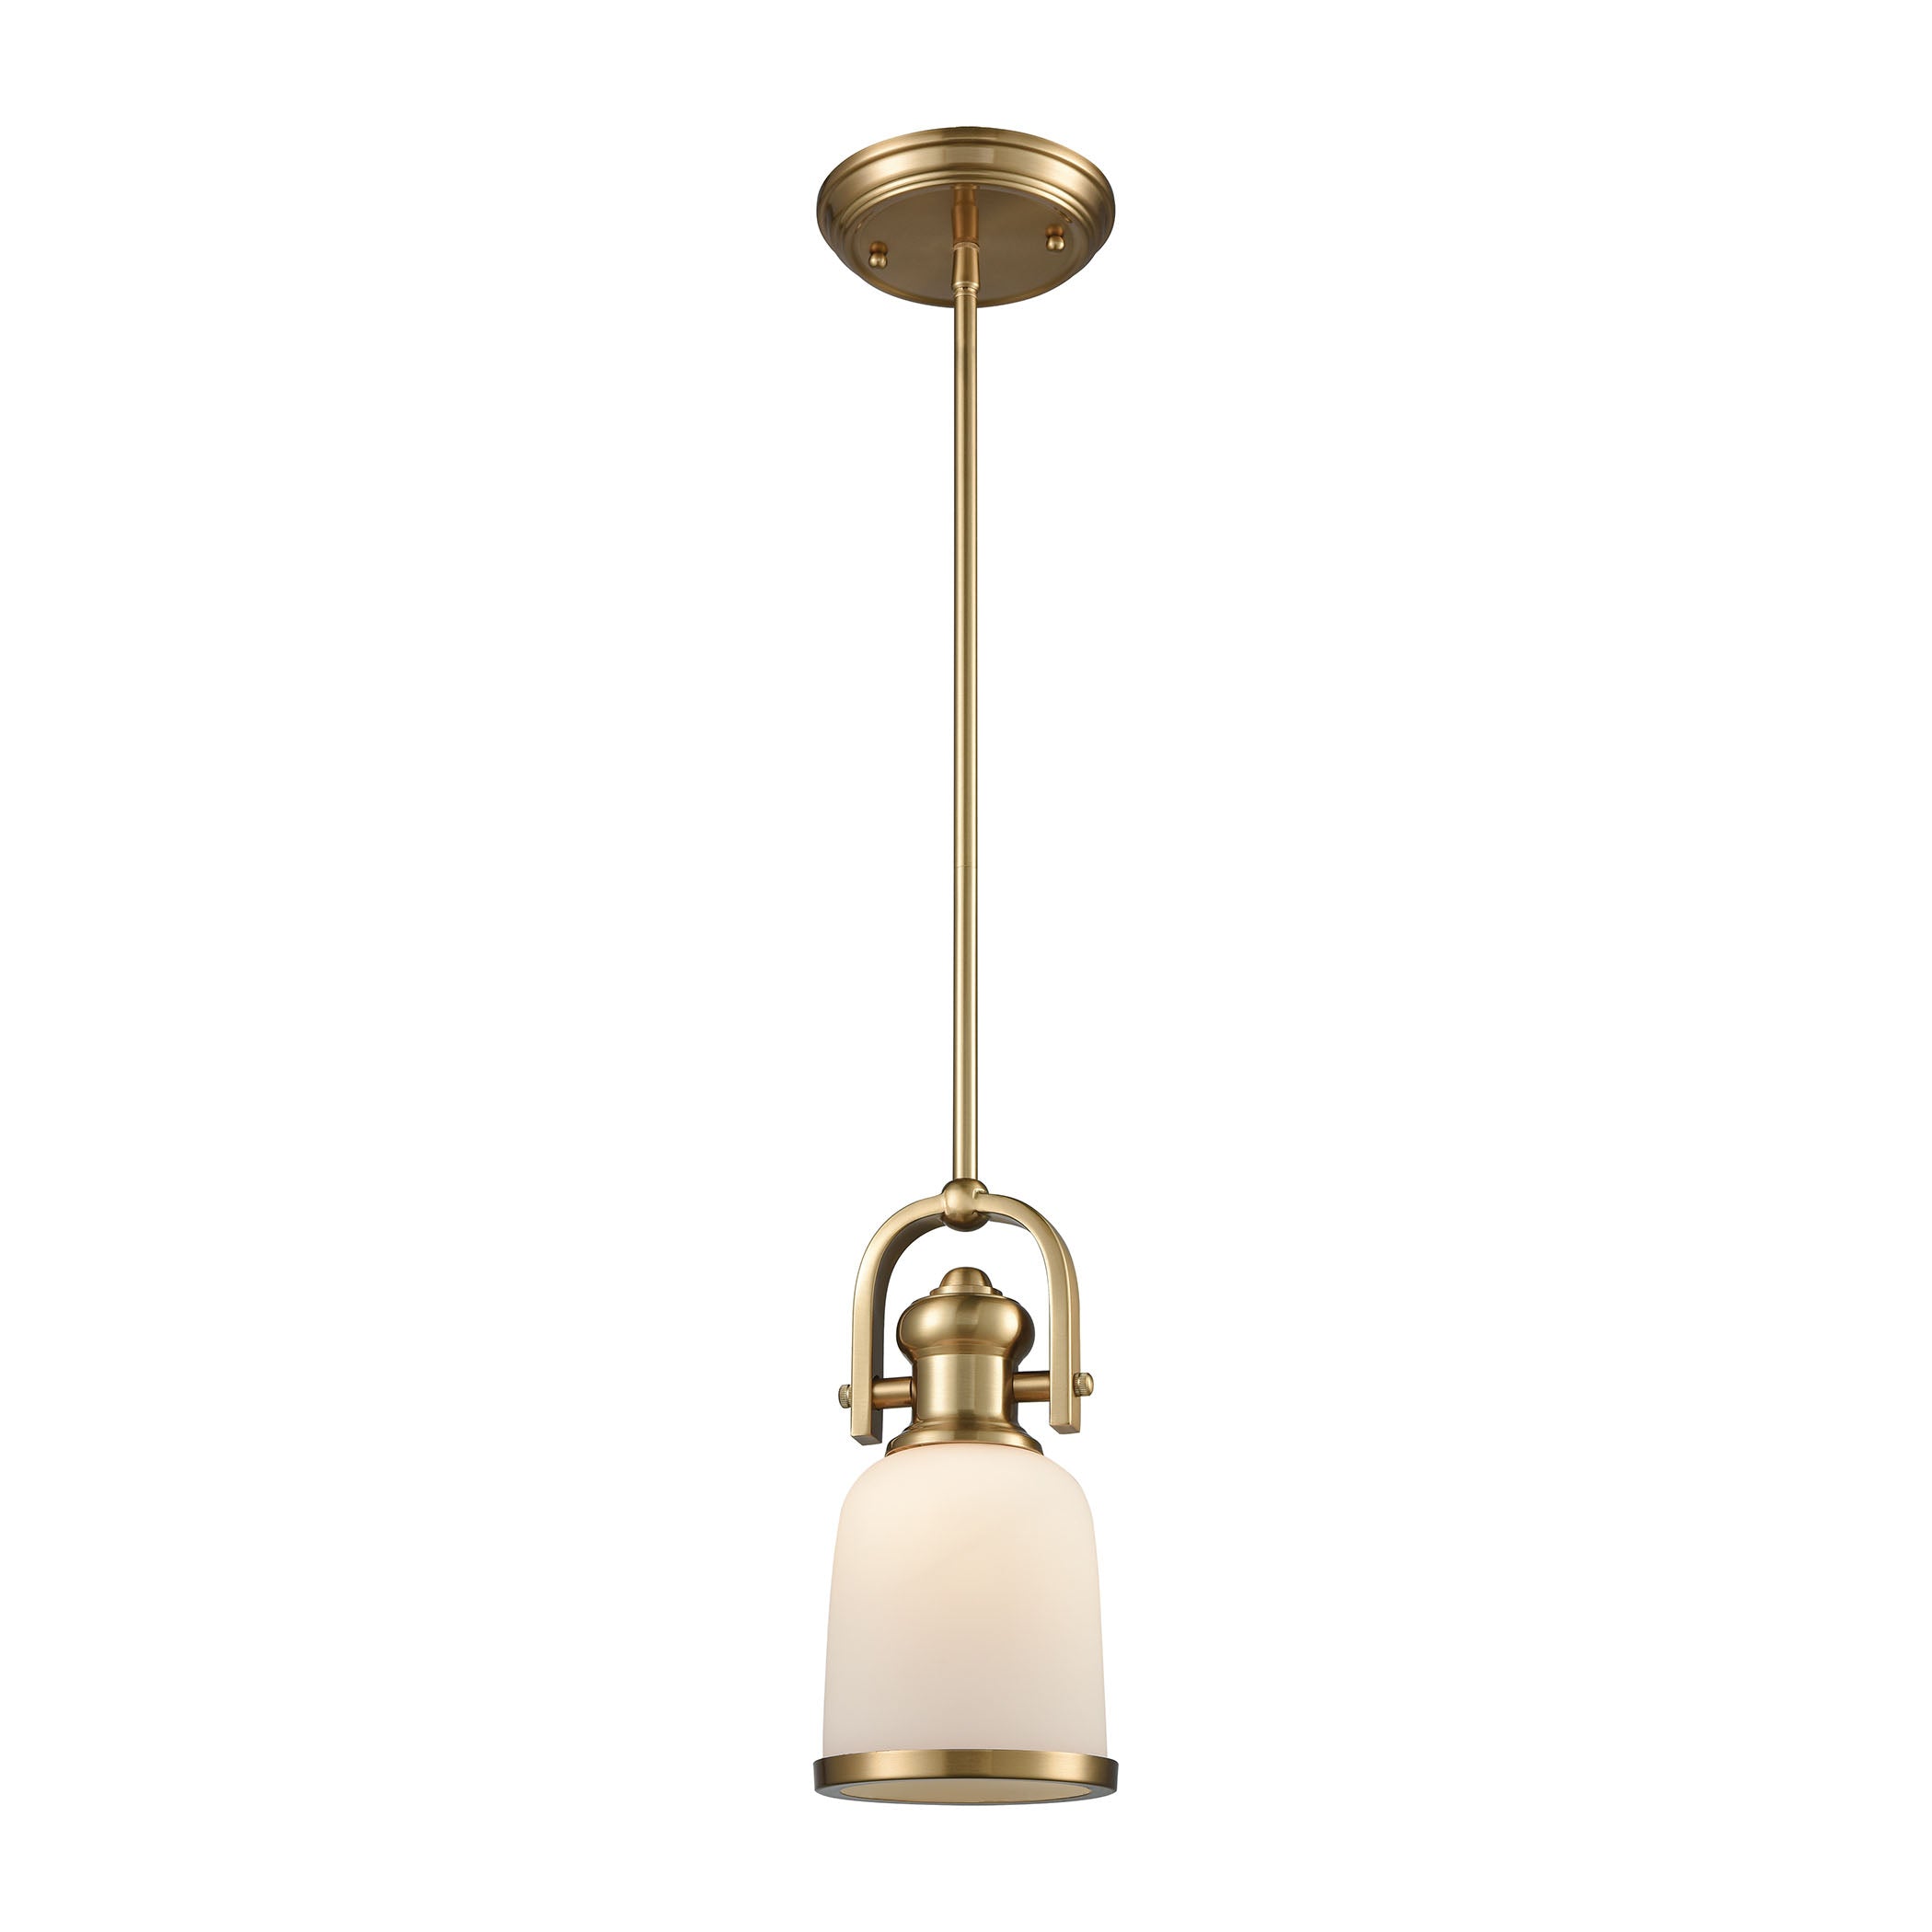 ELK Lighting 66691-1-LA Brooksdale 1-Light Mini Pendant in Satin Brass with White Glass - Includes Recessed Adapter Kit